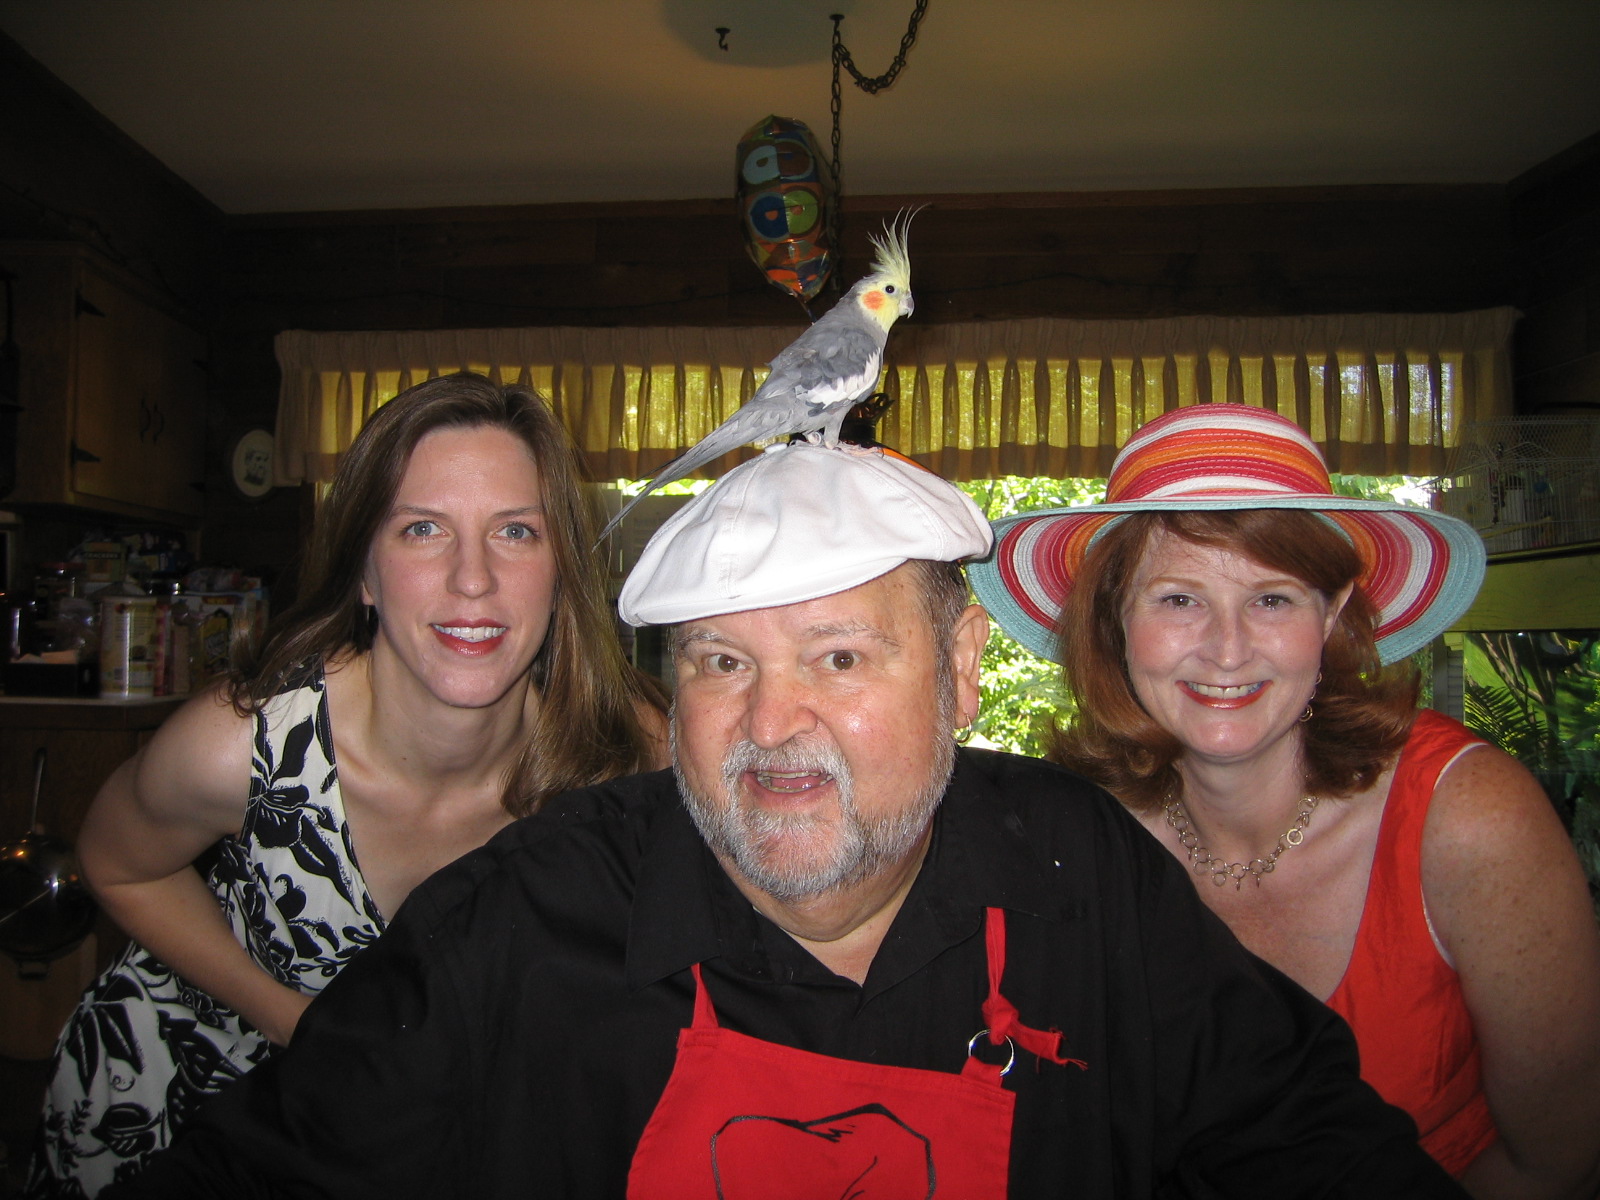 Darlena Roberts, Dom DeLuise and Sherry Hackney Cade on set for MY UNCLE HECTOR (2008).